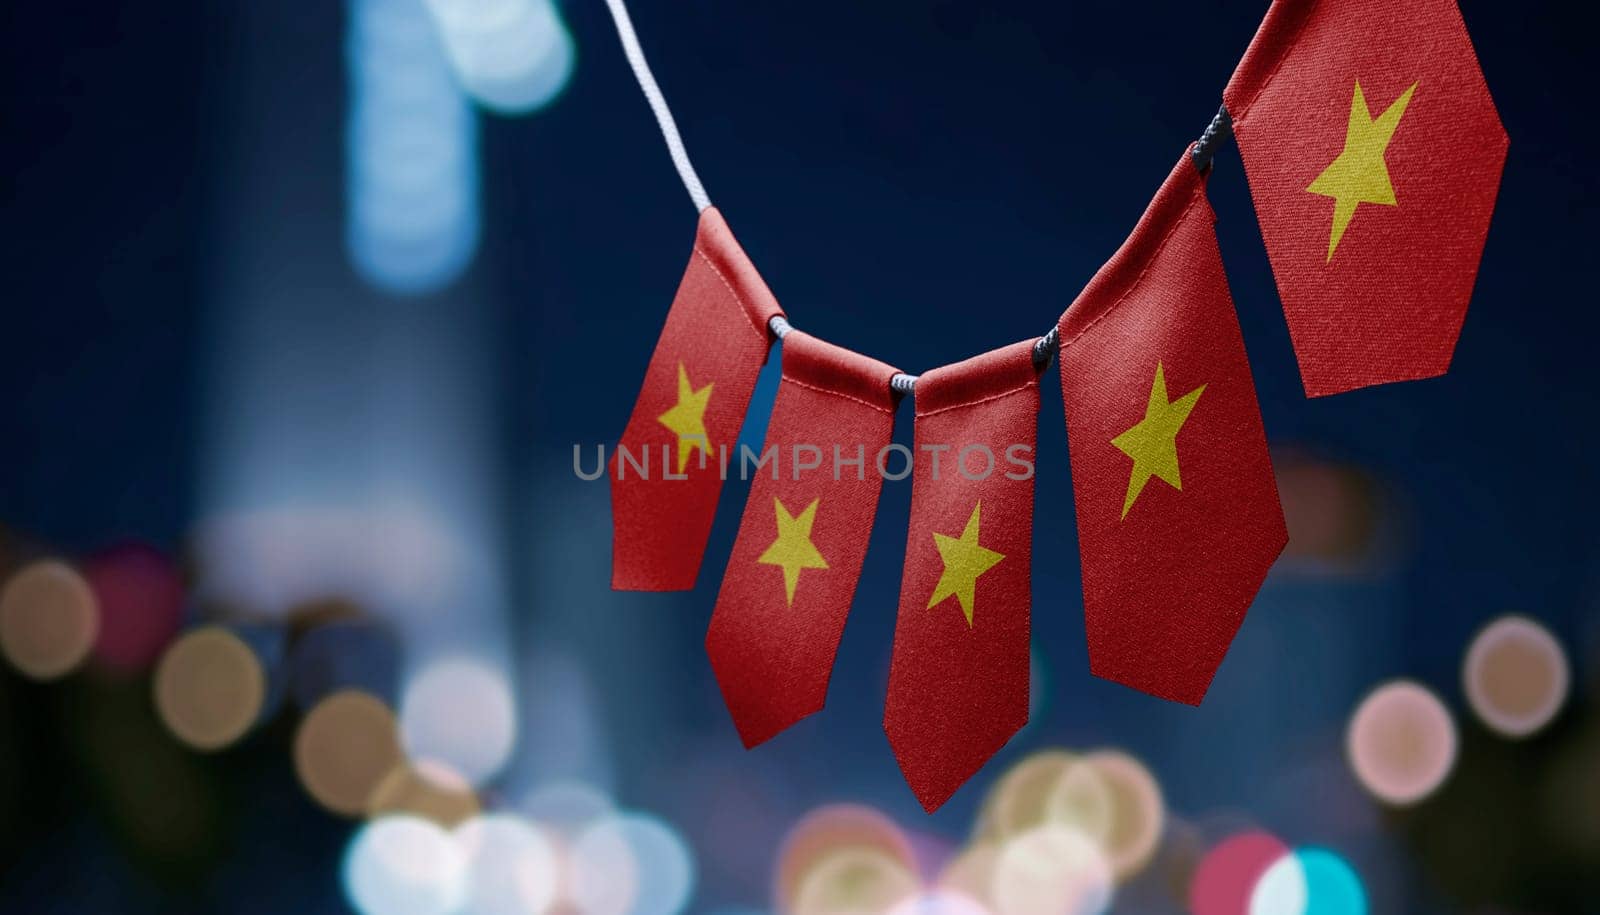 A garland of Vietnam national flags on an abstract blurred background.